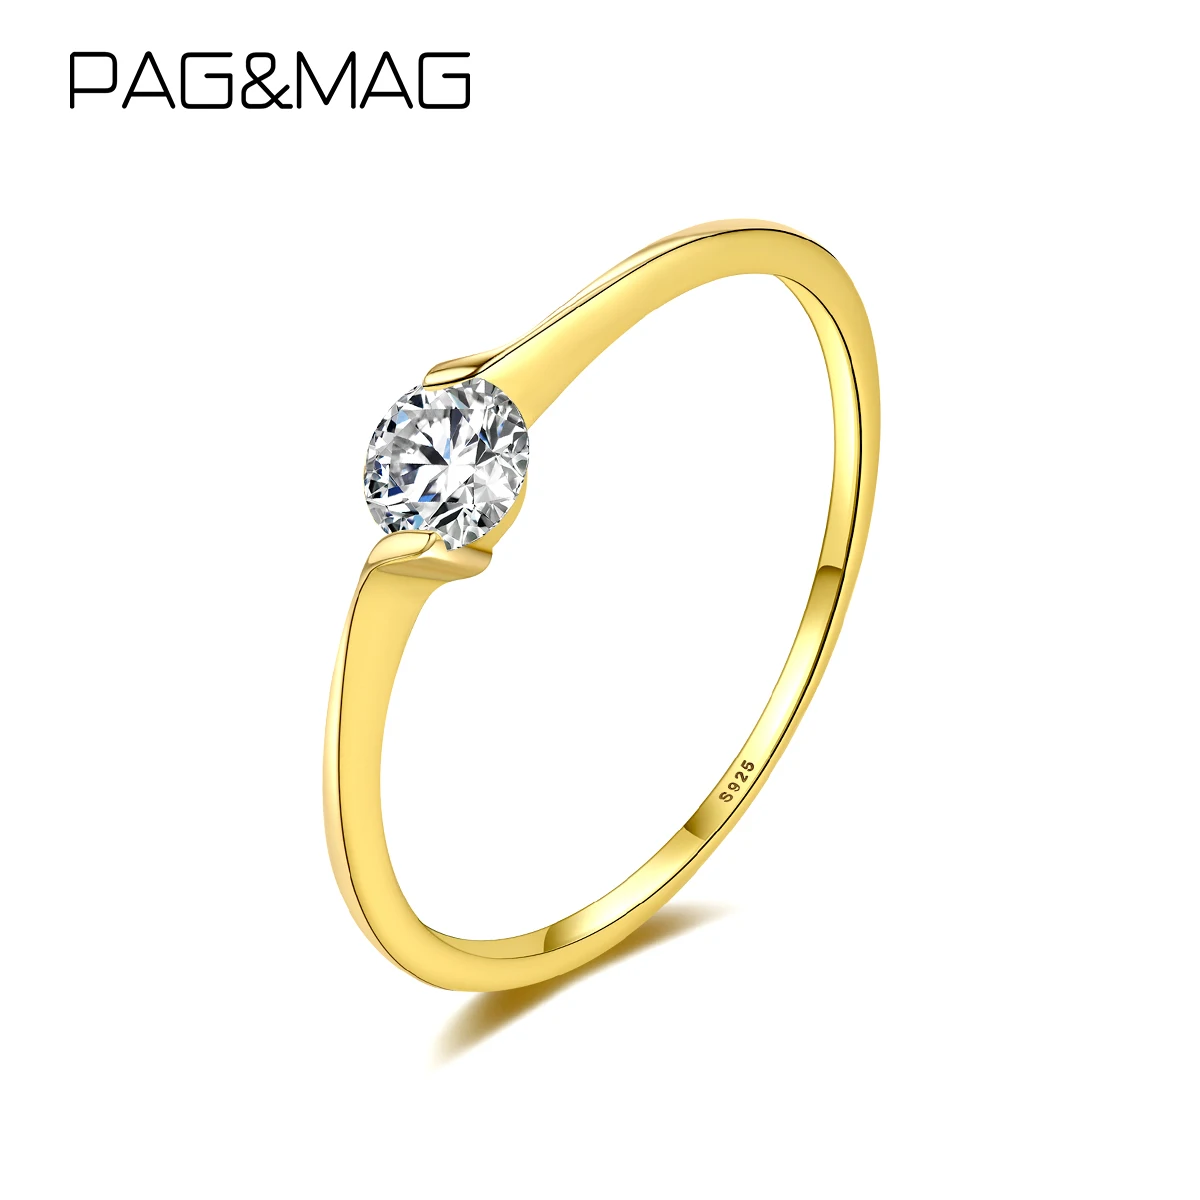 

PAG&MAG 925 Sterling Silver Imitation Diamond Rings For Women 14K Gold Color Wedding Band Fashion Sterling Silver Jewelry Gifts